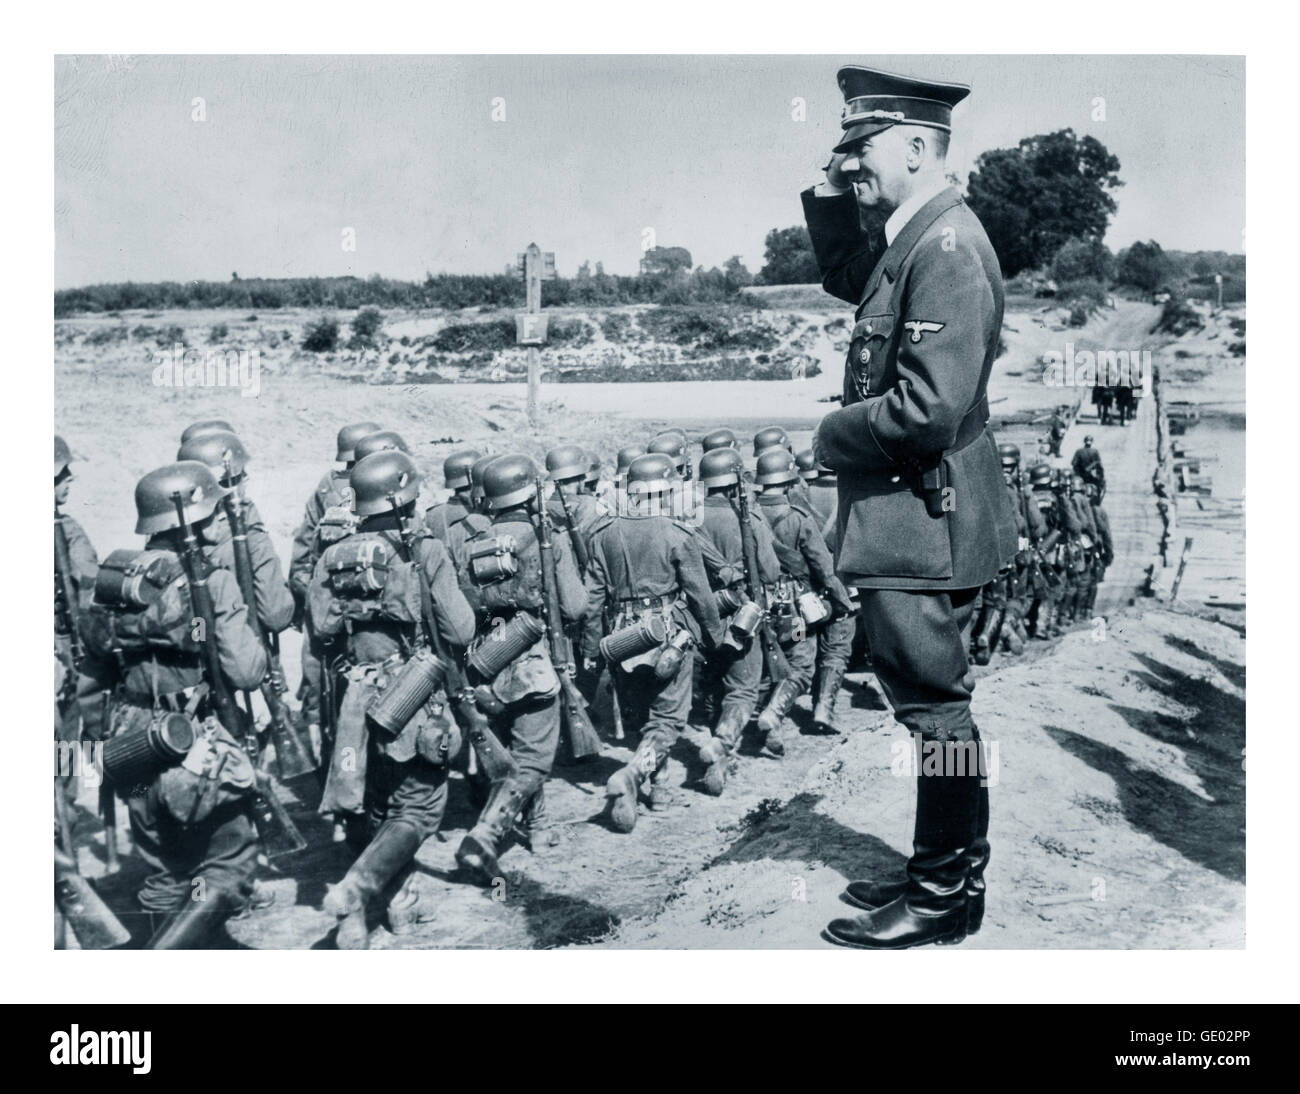 1939 GERMAN NAZI OCCUPATION  INVASION POLAND Adolf Hitler saluting marching Wehrmacht troops during occupation of Poland WW2 Stock Photo